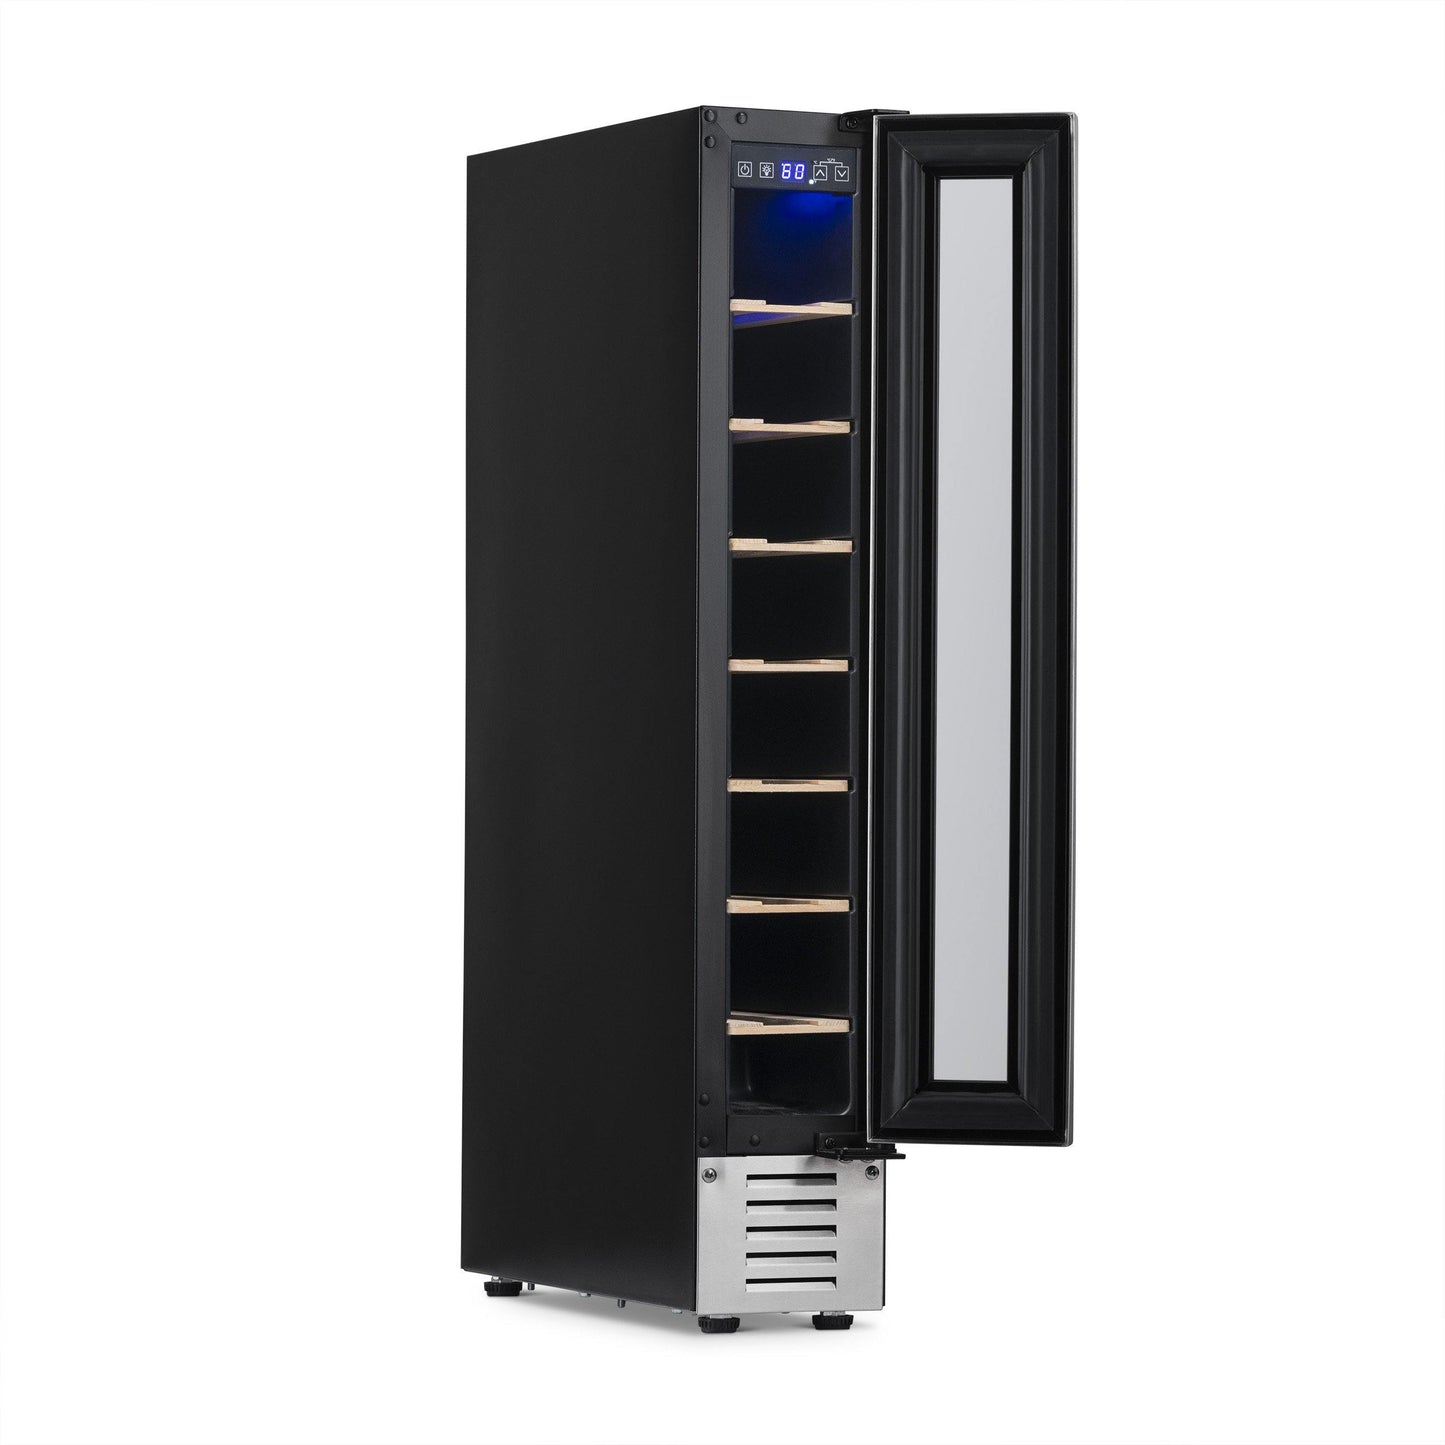 Newair 6" Built-In 7 Bottle Compressor Wine Fridge in Stainless Steel, Compact Size with Precision Digital Thermostat and Premium Beech Wood Shelves-Wine Fridges-The Wine Cooler Club